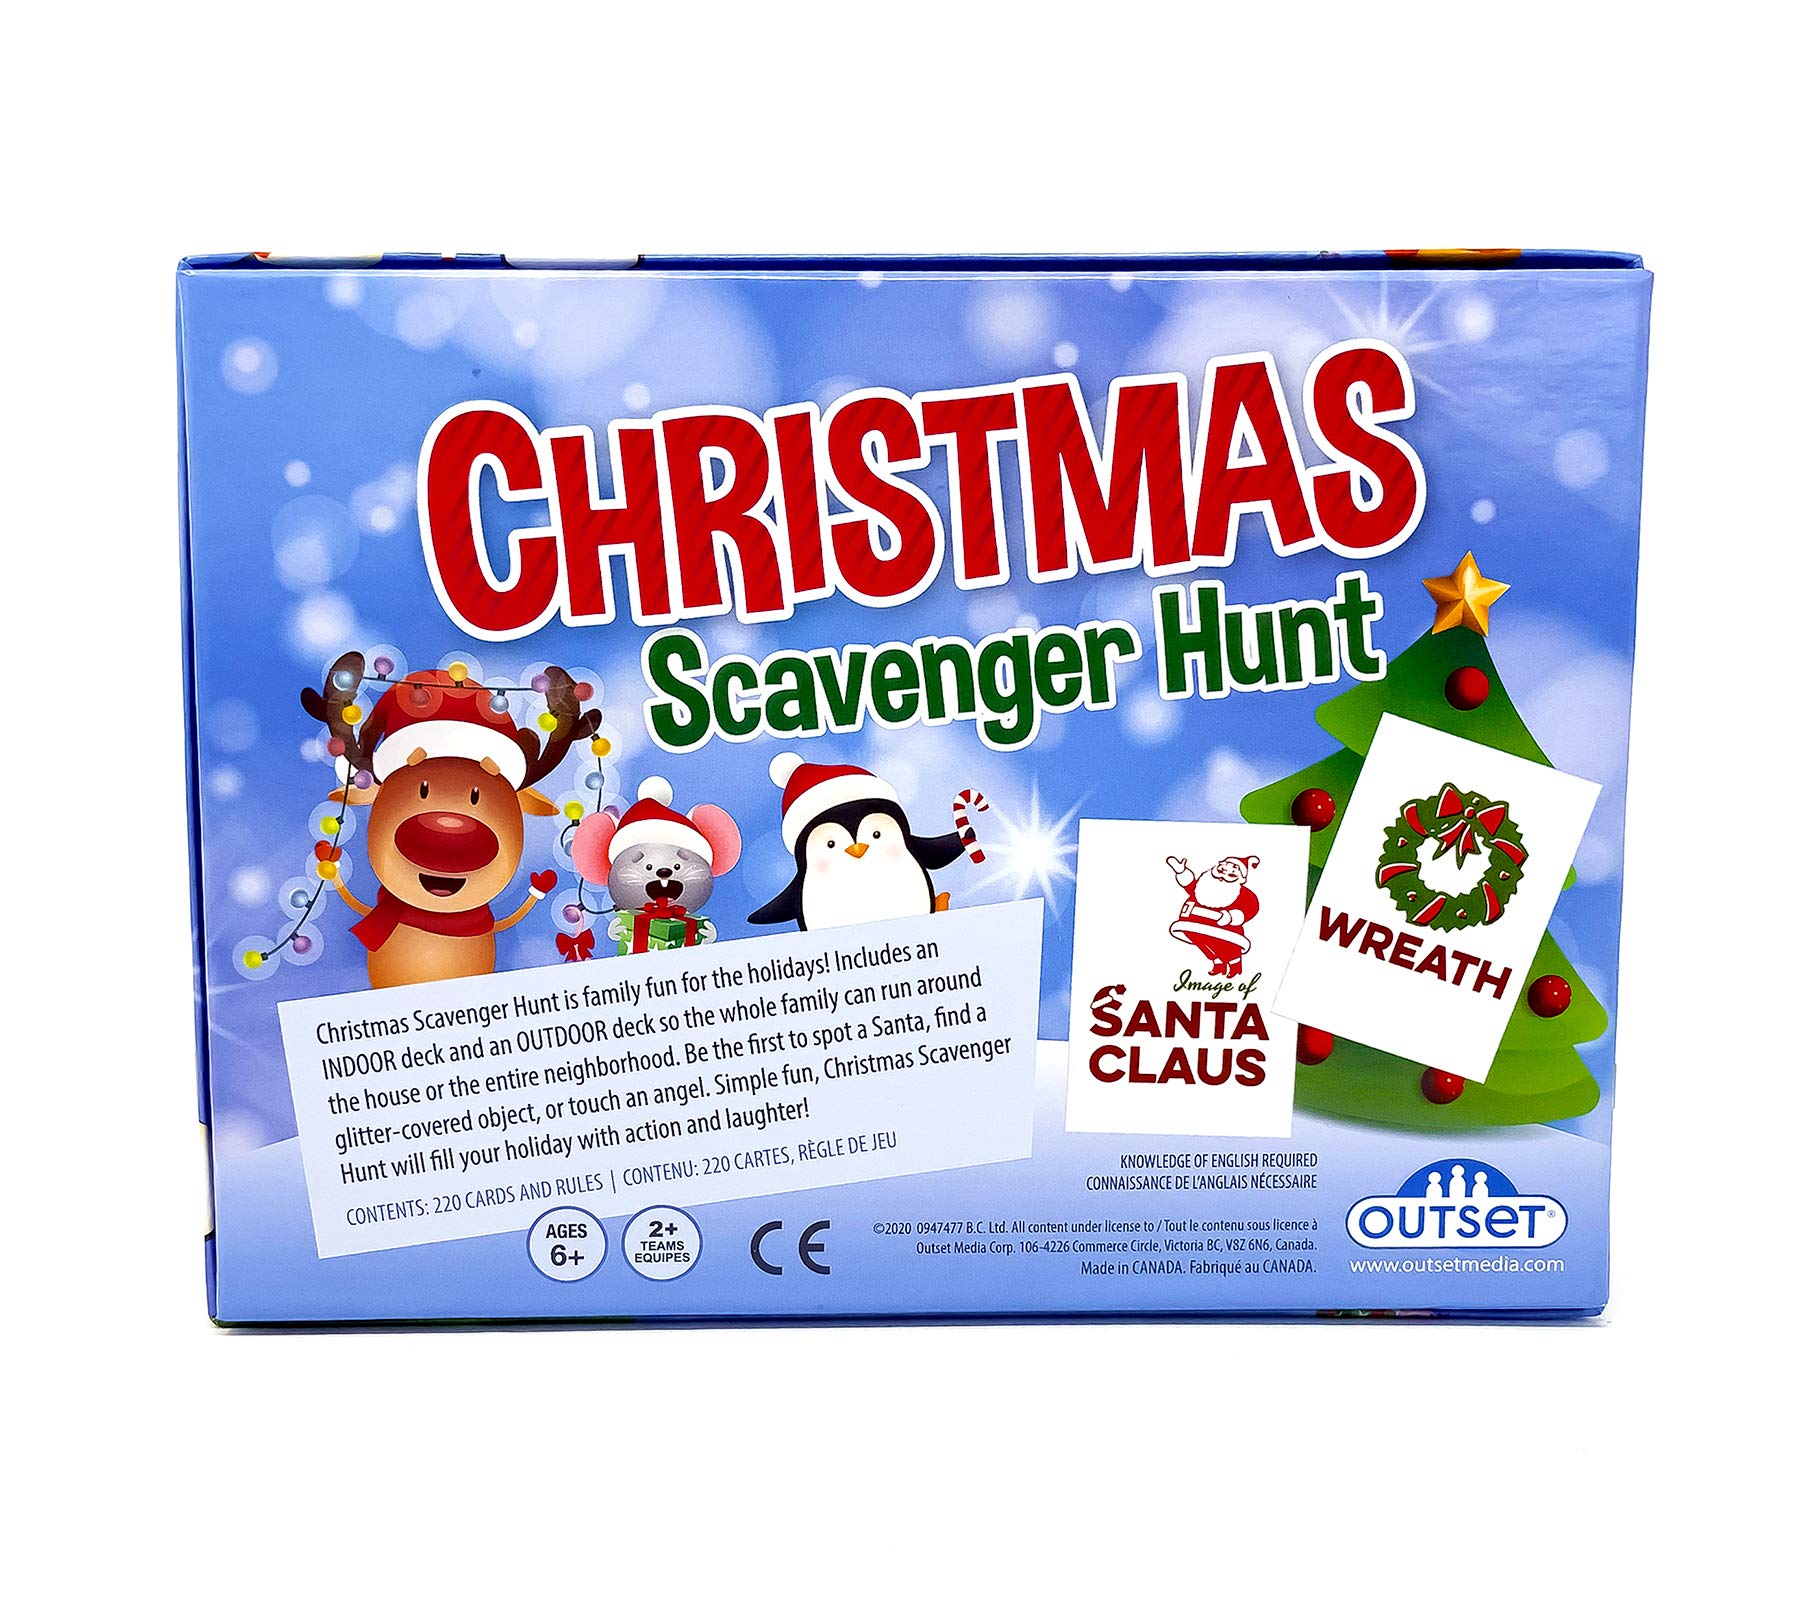 Christmas Scavenger Hunt Game (Amazon Exclusive) – Contains 220 Cards – Christmas Themed Party Game for 2 or More Players Ages 6 and up by Outset Media